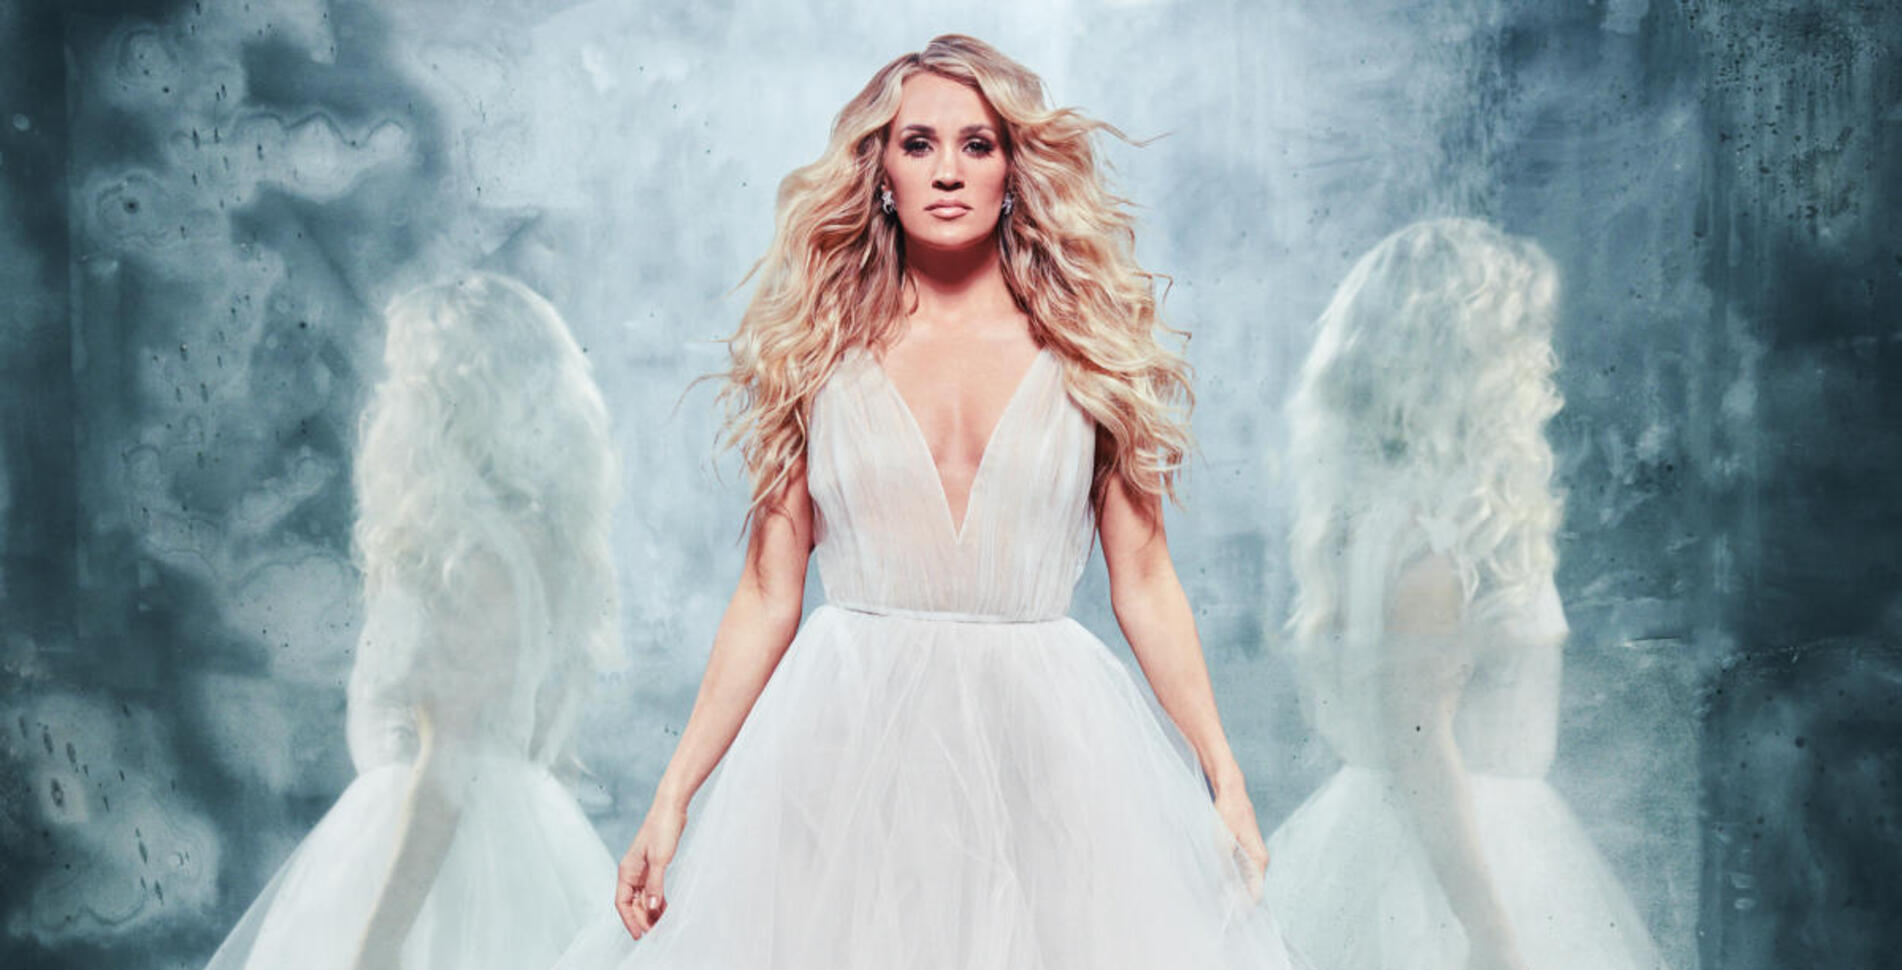 What Is "Ugly" Lasagna? Carrie Underwood’s Secret to Looking Amazing